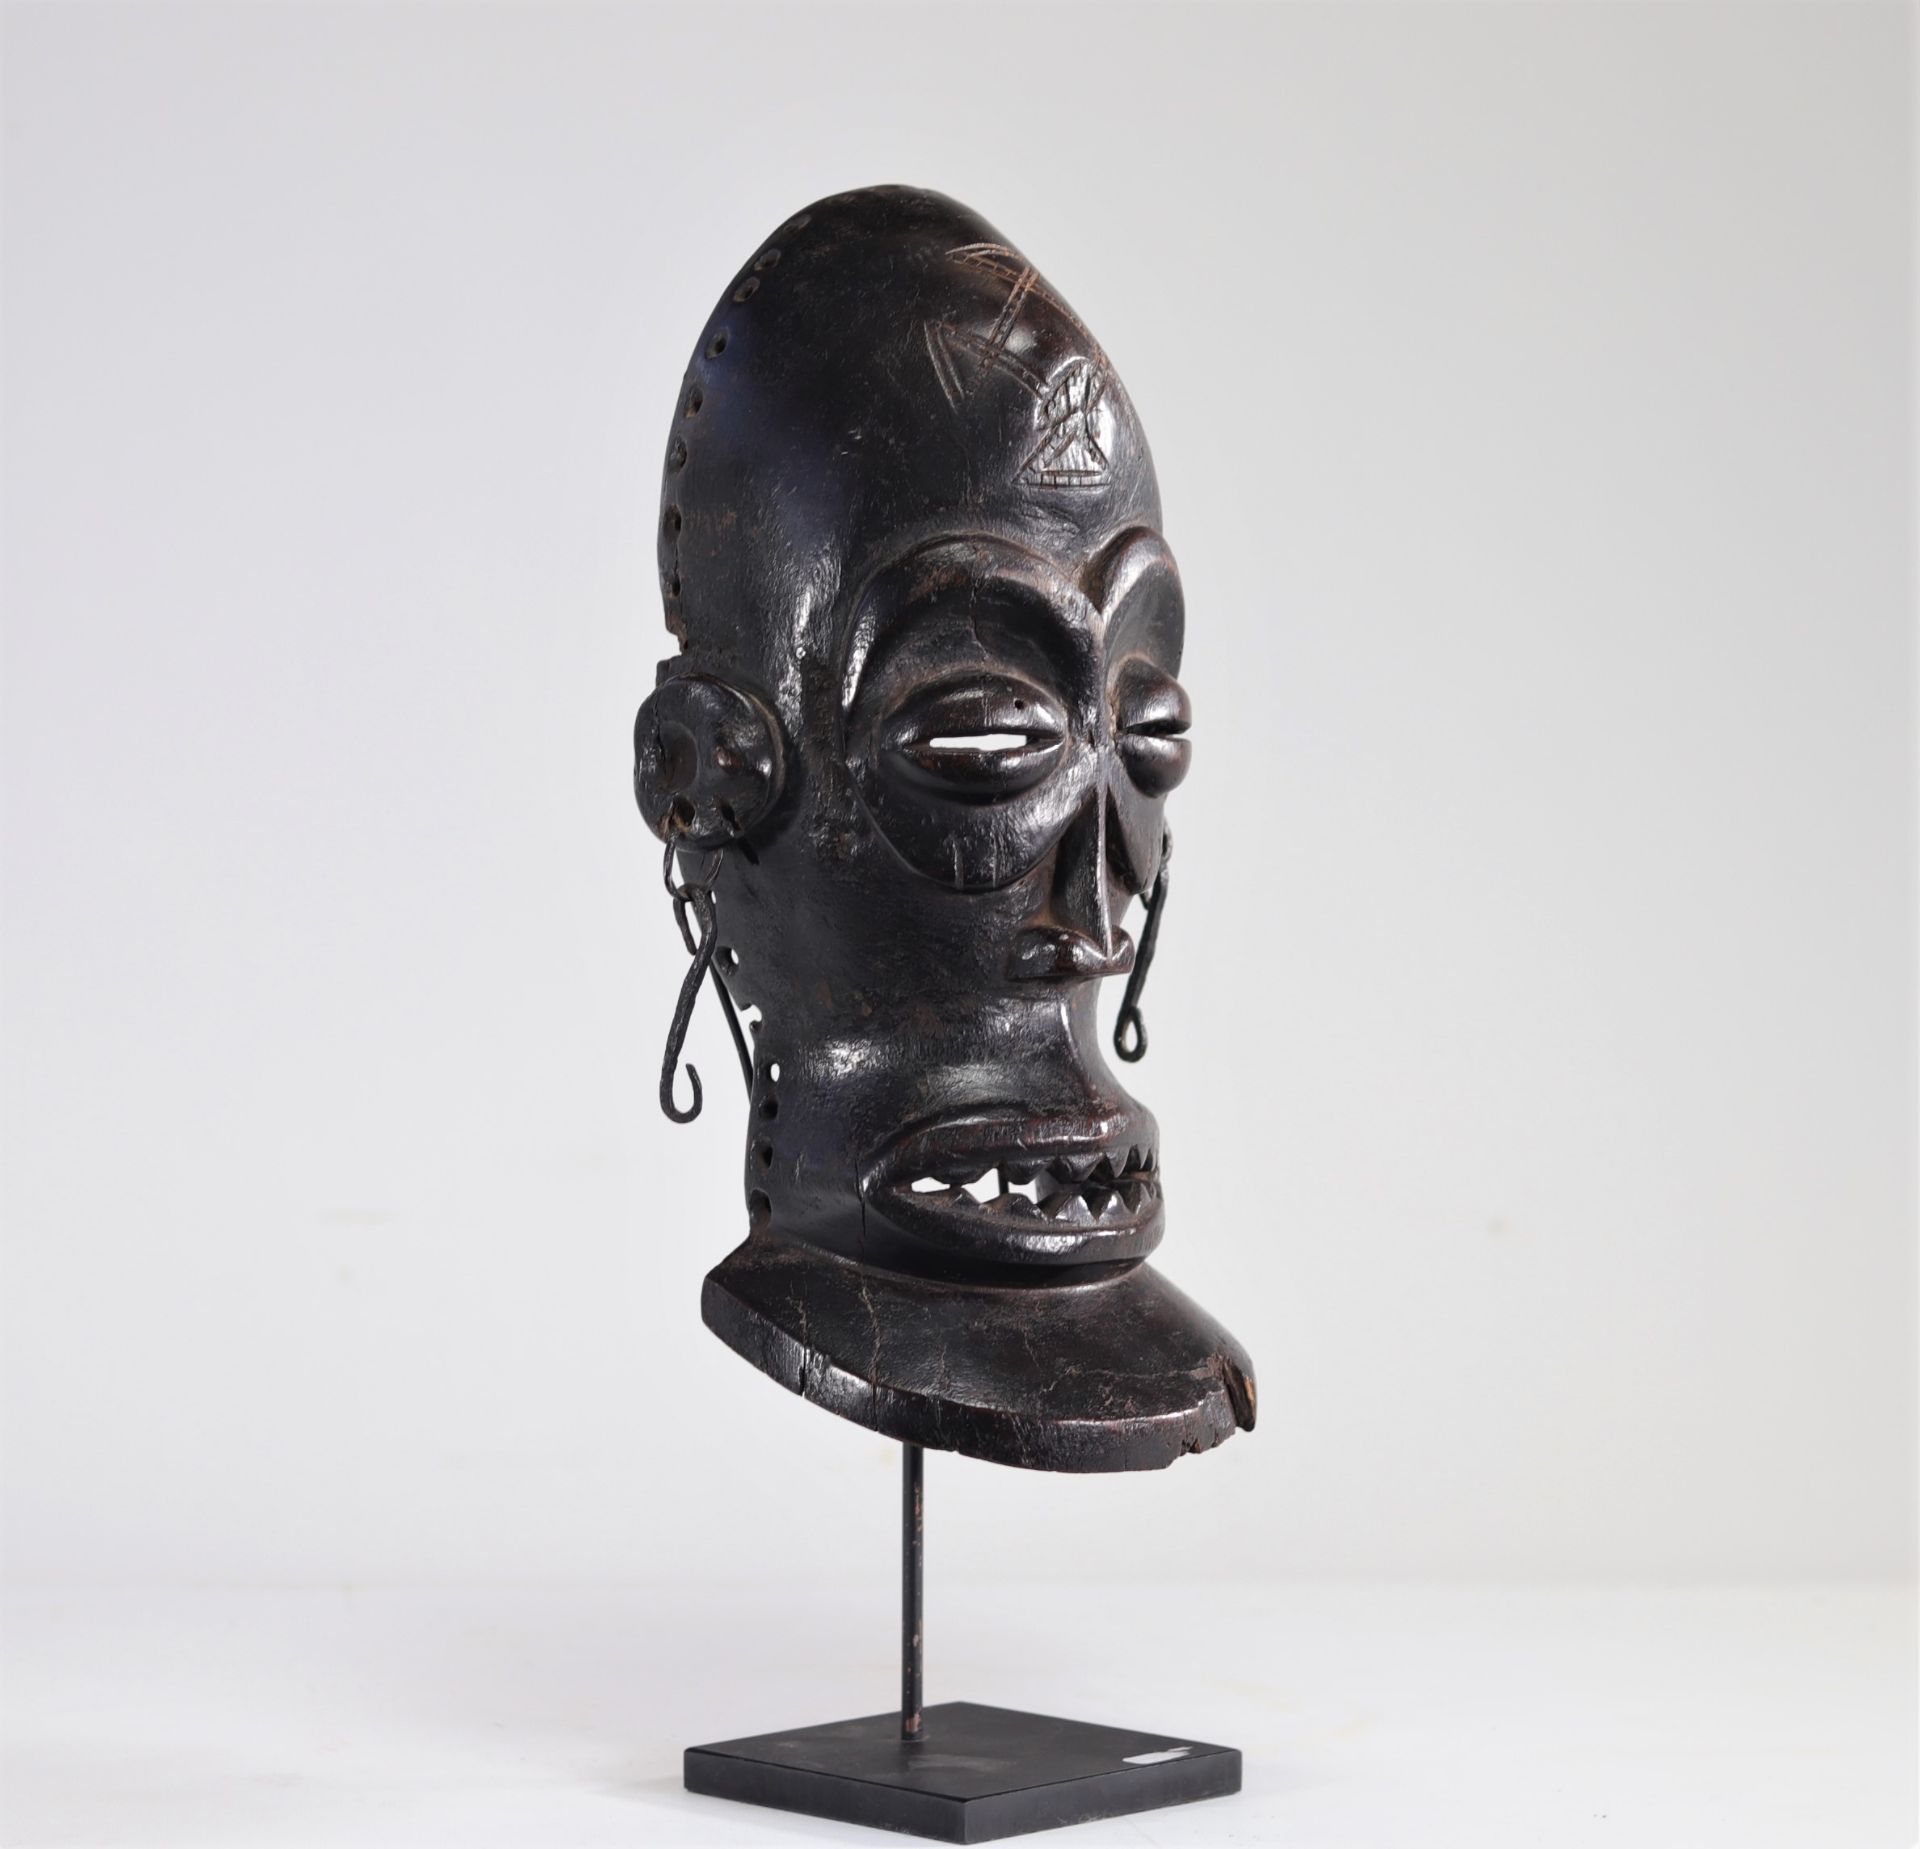 Tchokwe mask from the Rep. req. congo